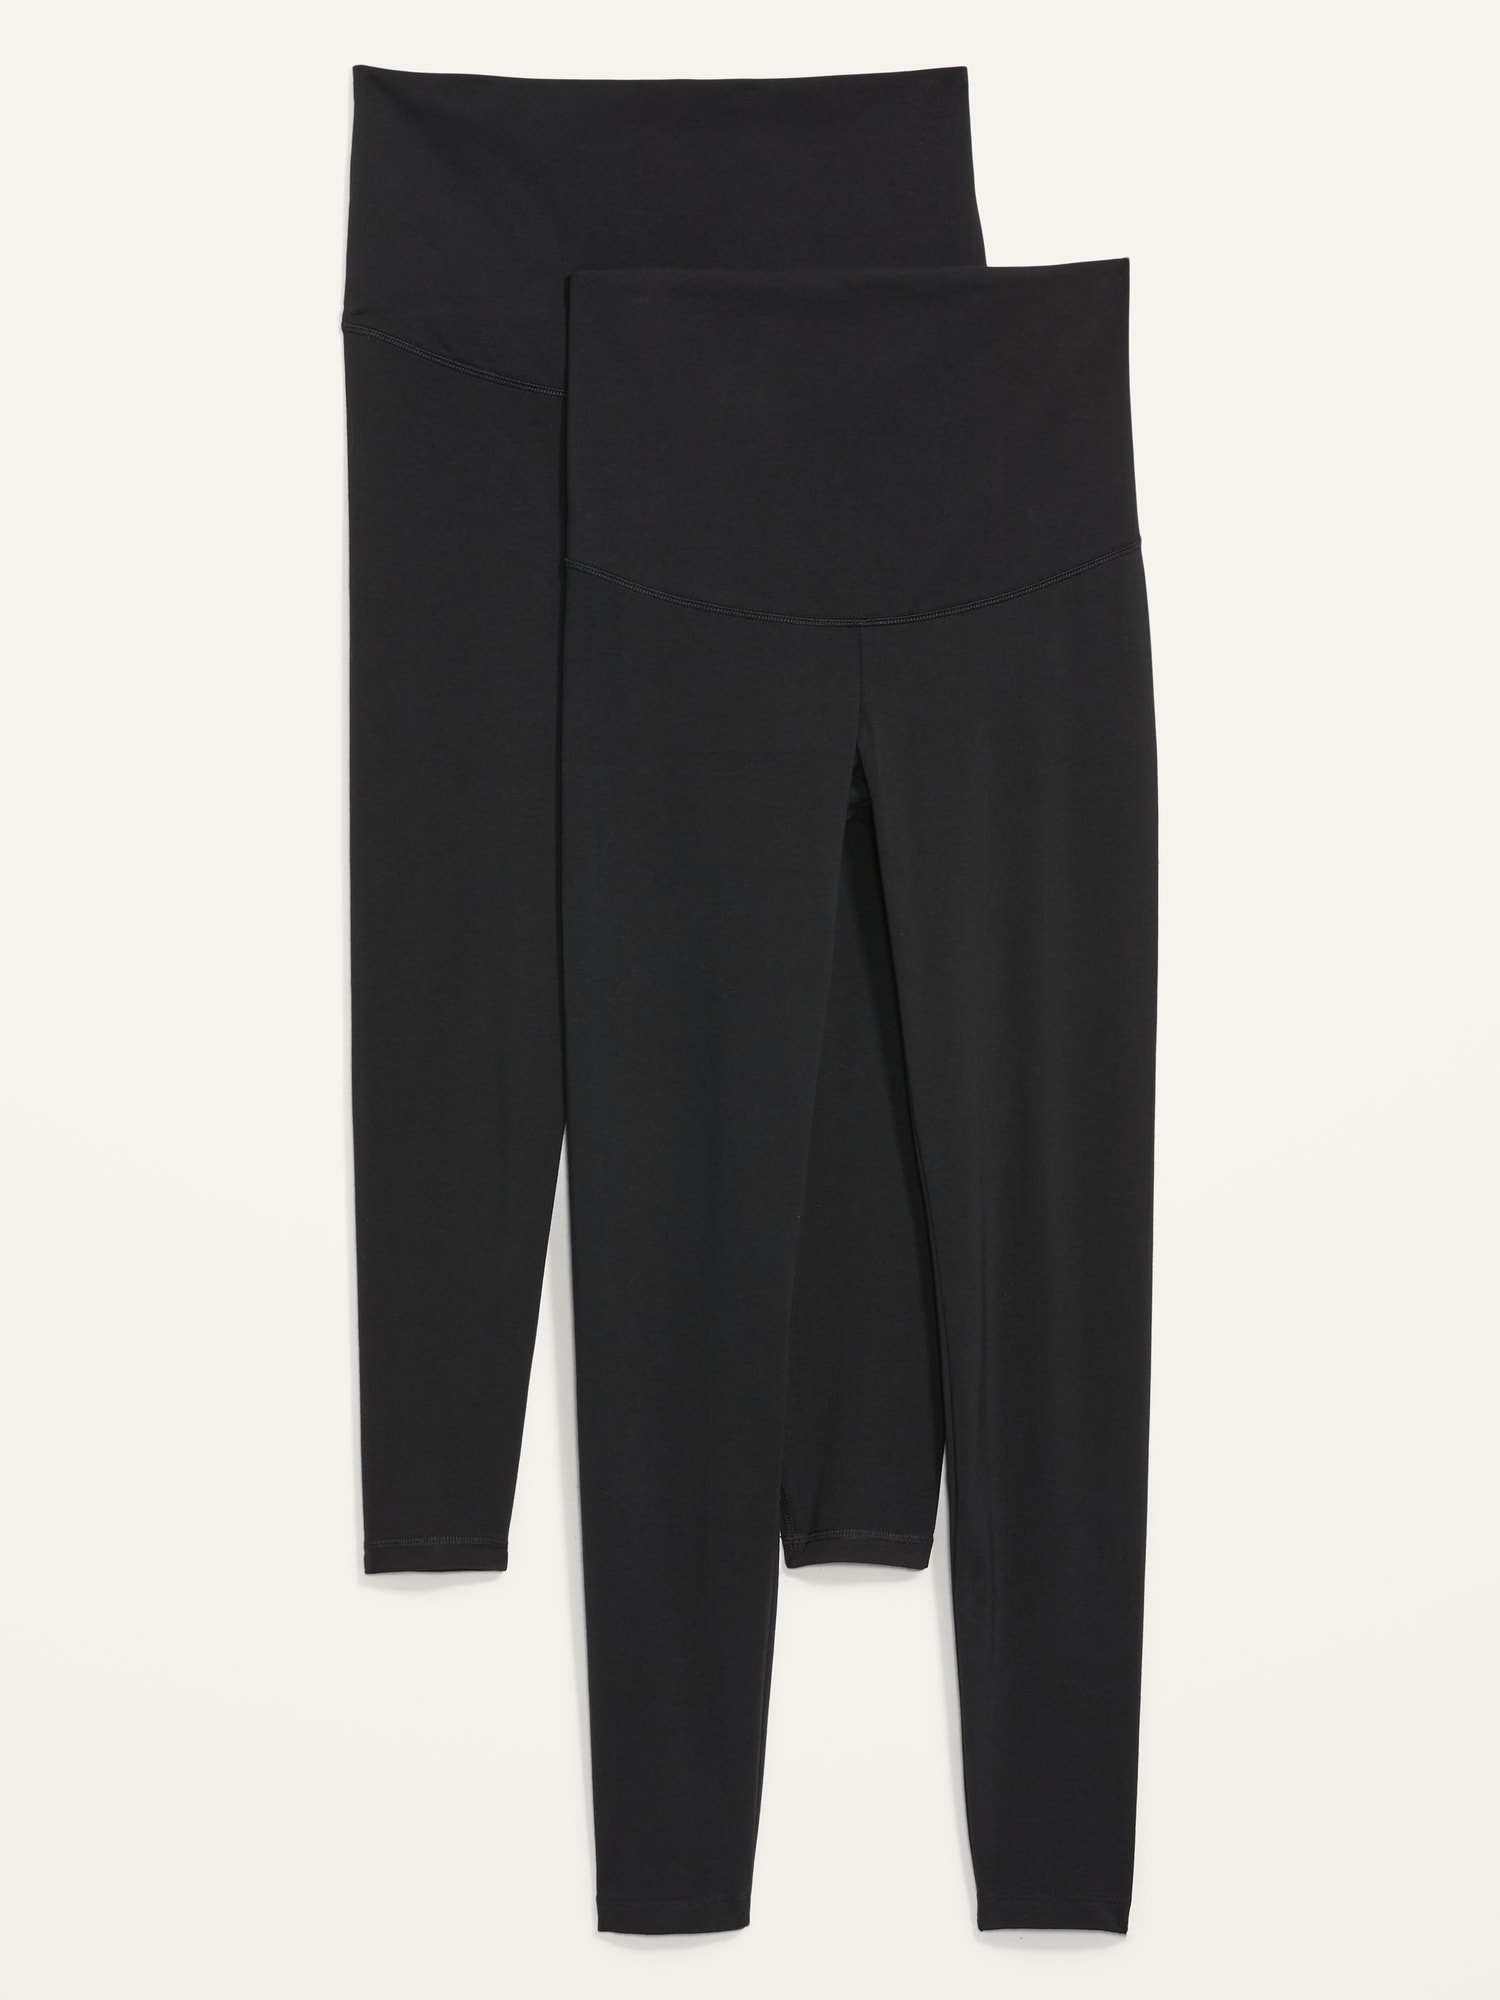 Old Navy Thermal Leggings $14.98 (Reg. $24.99) - Today Only